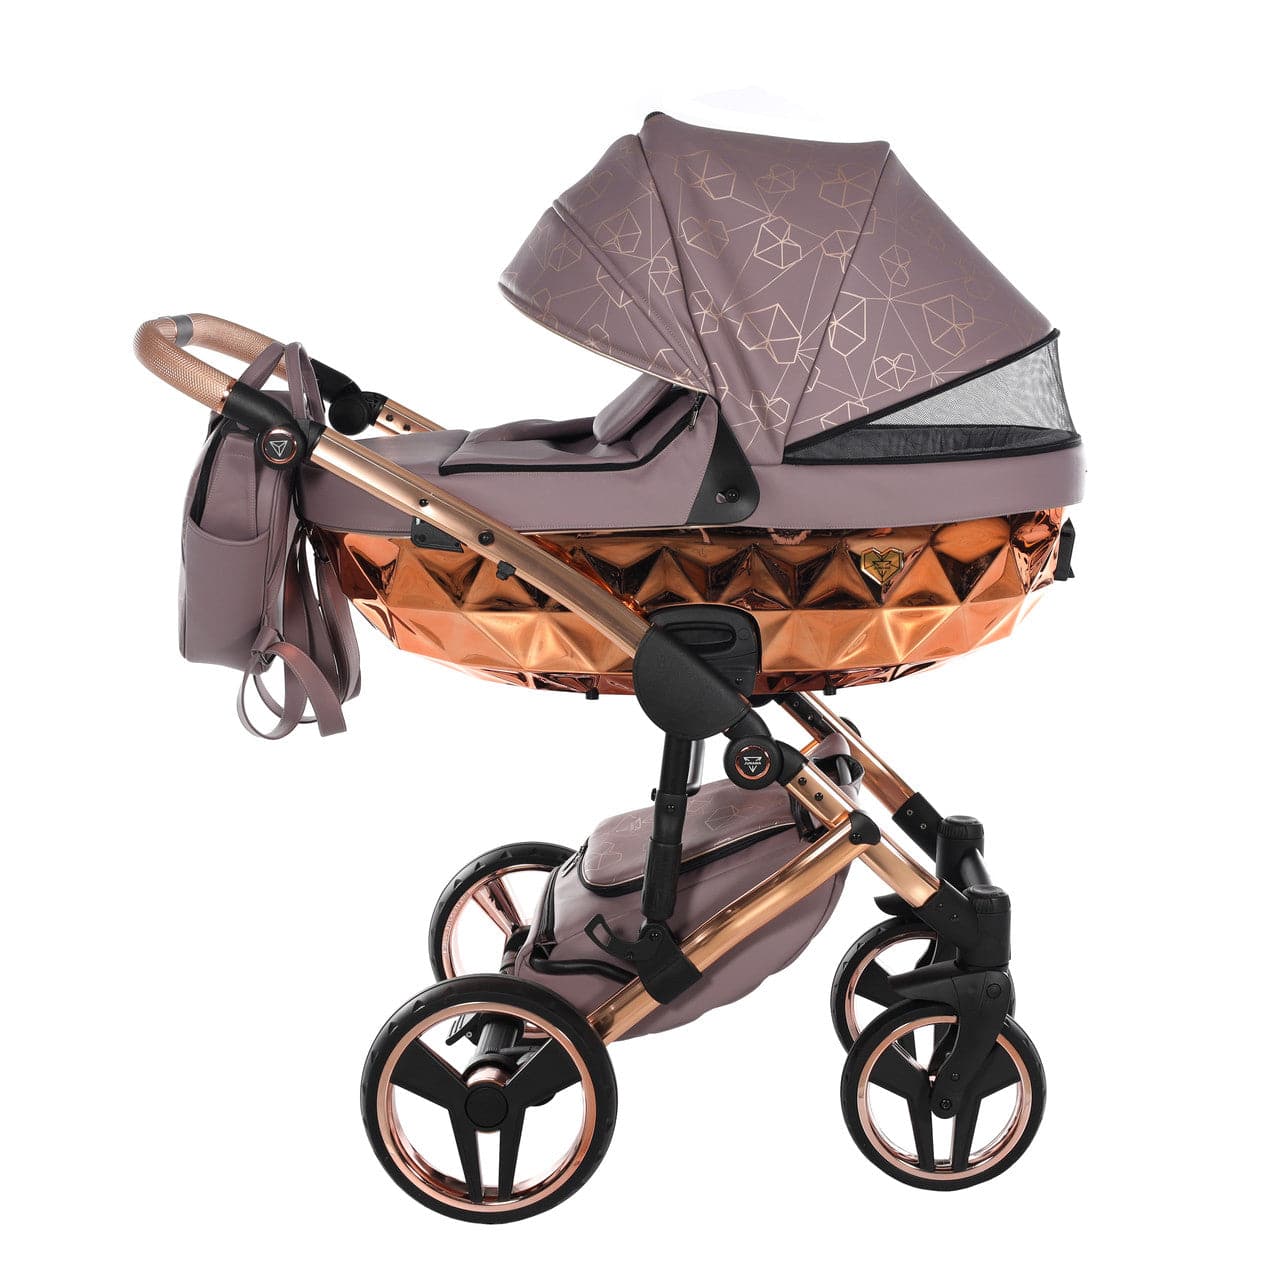 Junama Heart 2 In 1 Pram - Mauve - For Your Little One